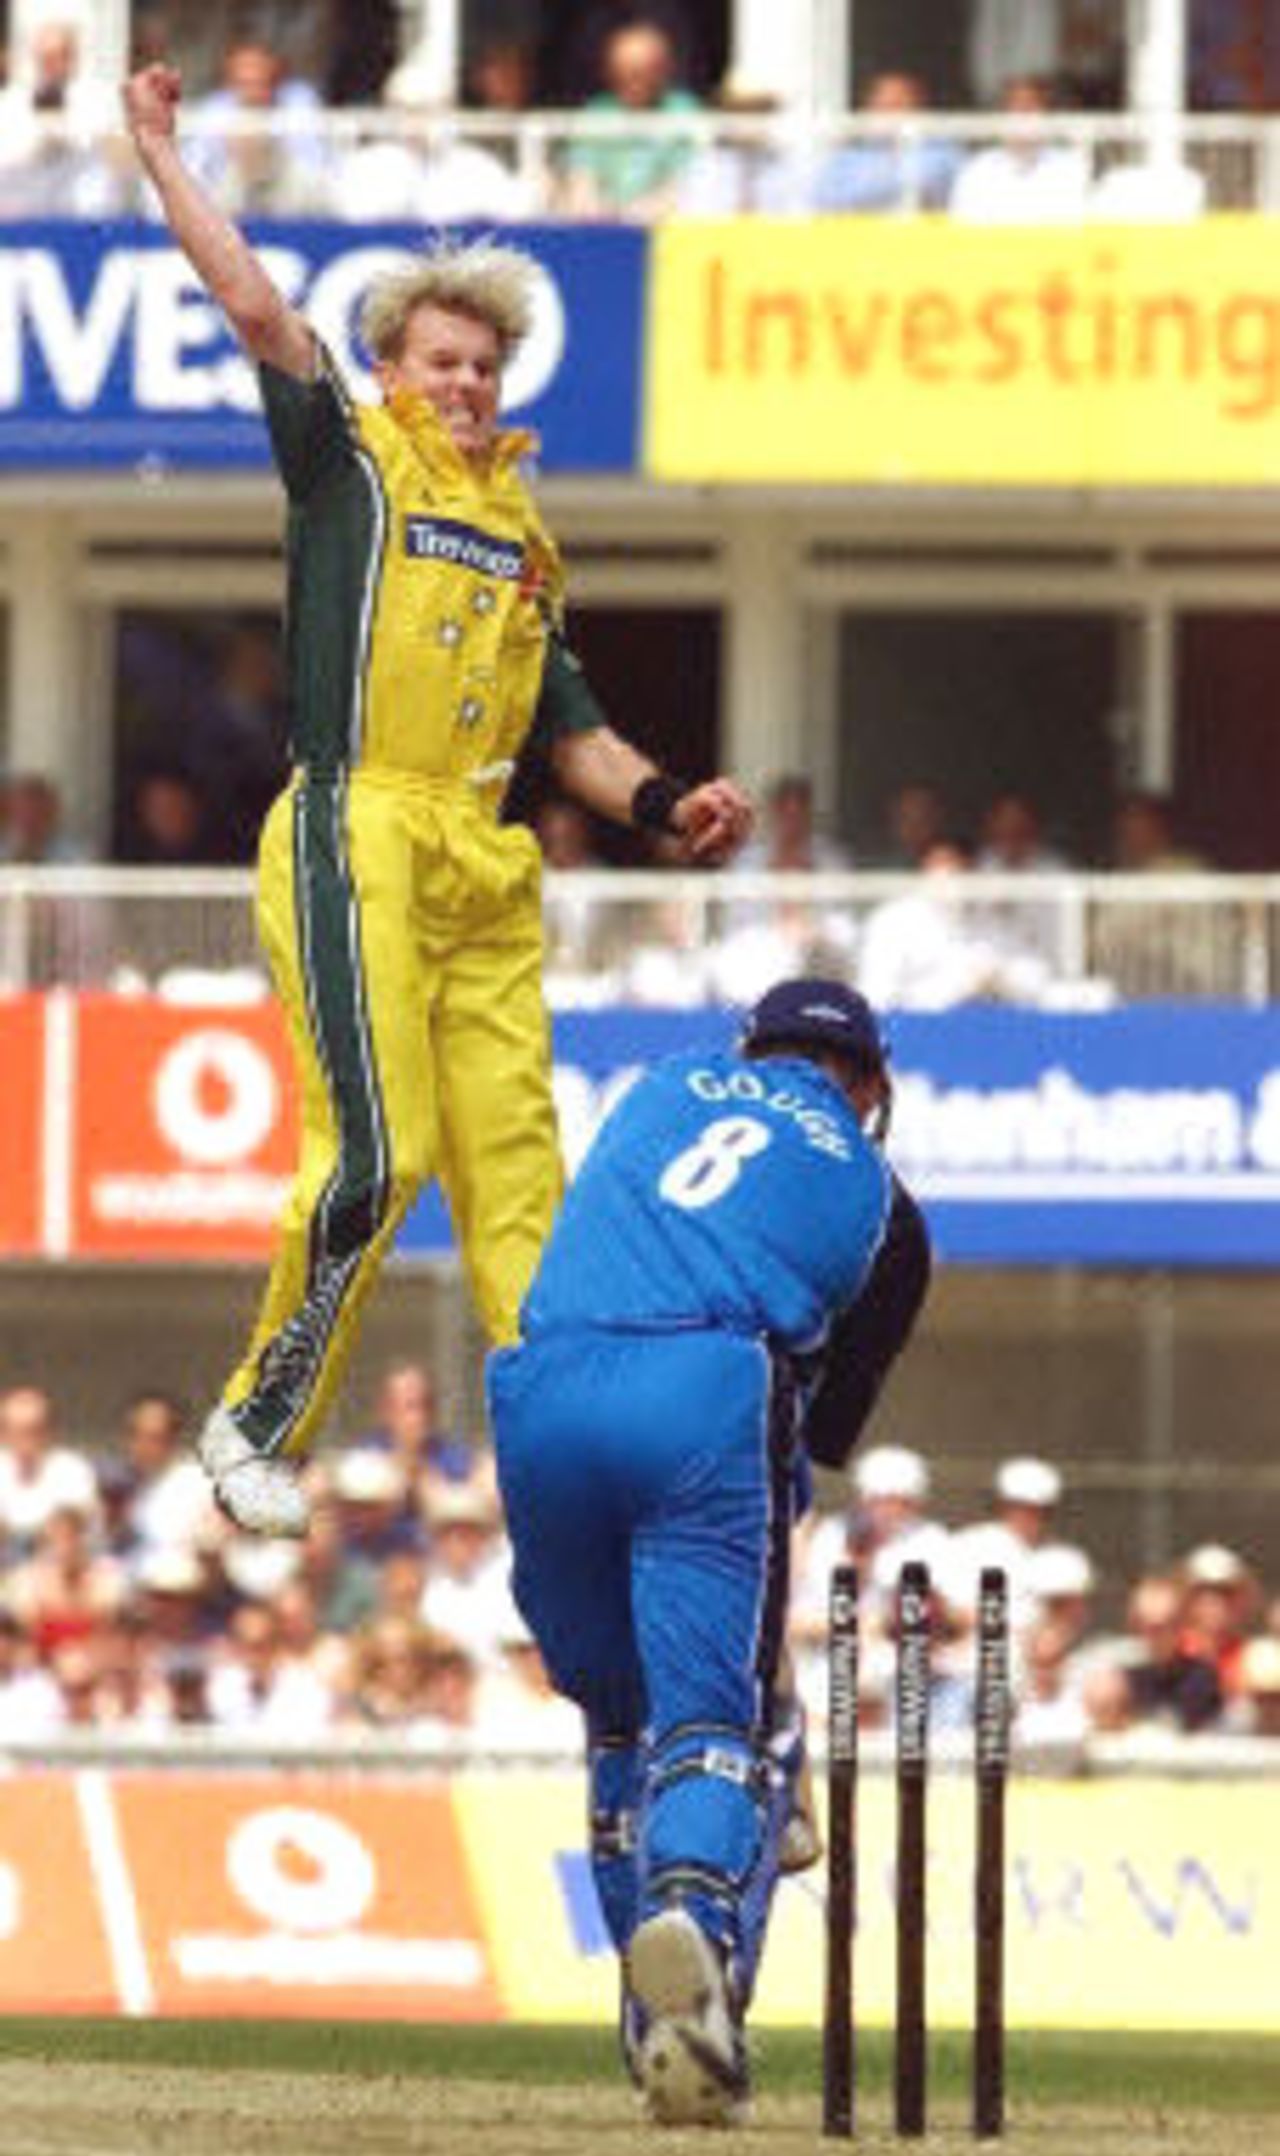 Brett Lee leaps high in the air to dismiss Darren Gough for a golden duck, 9th ODI at the Oval, 21 June 2001.